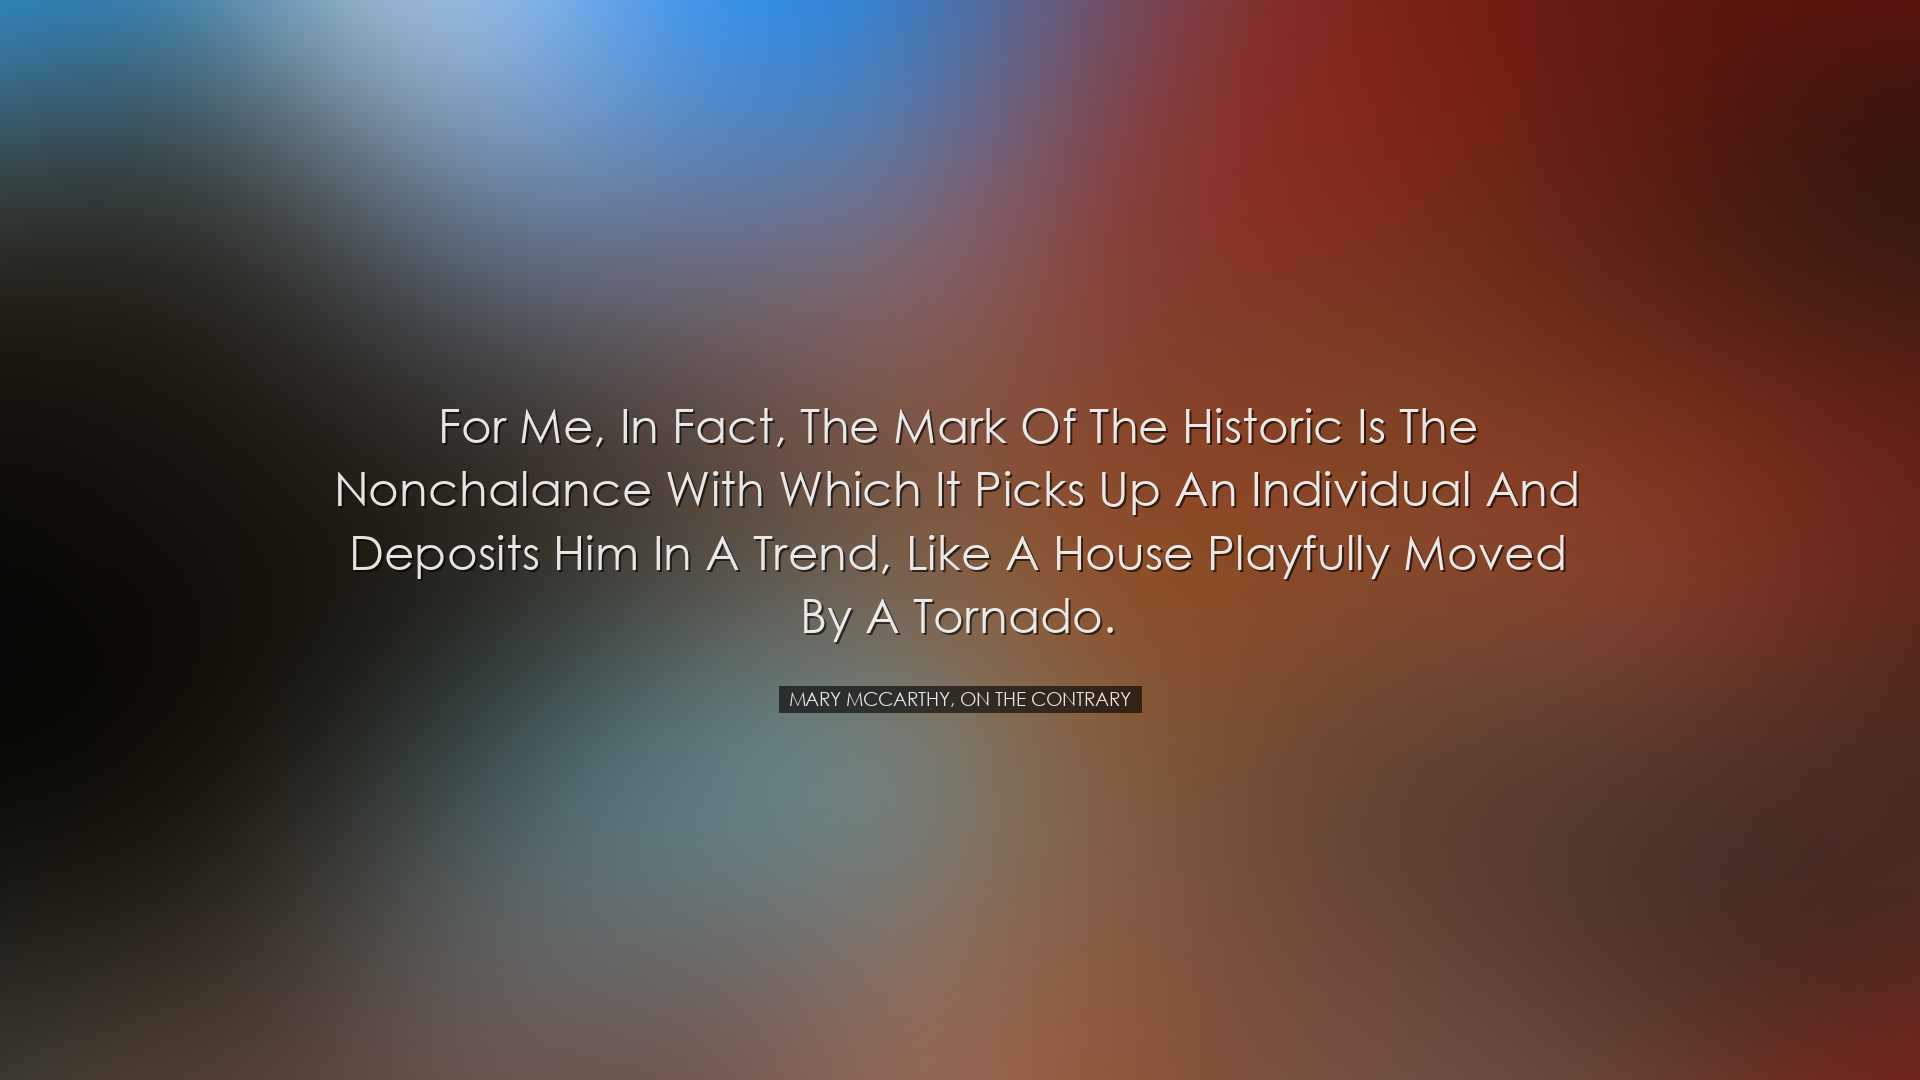 For me, in fact, the mark of the historic is the nonchalance with